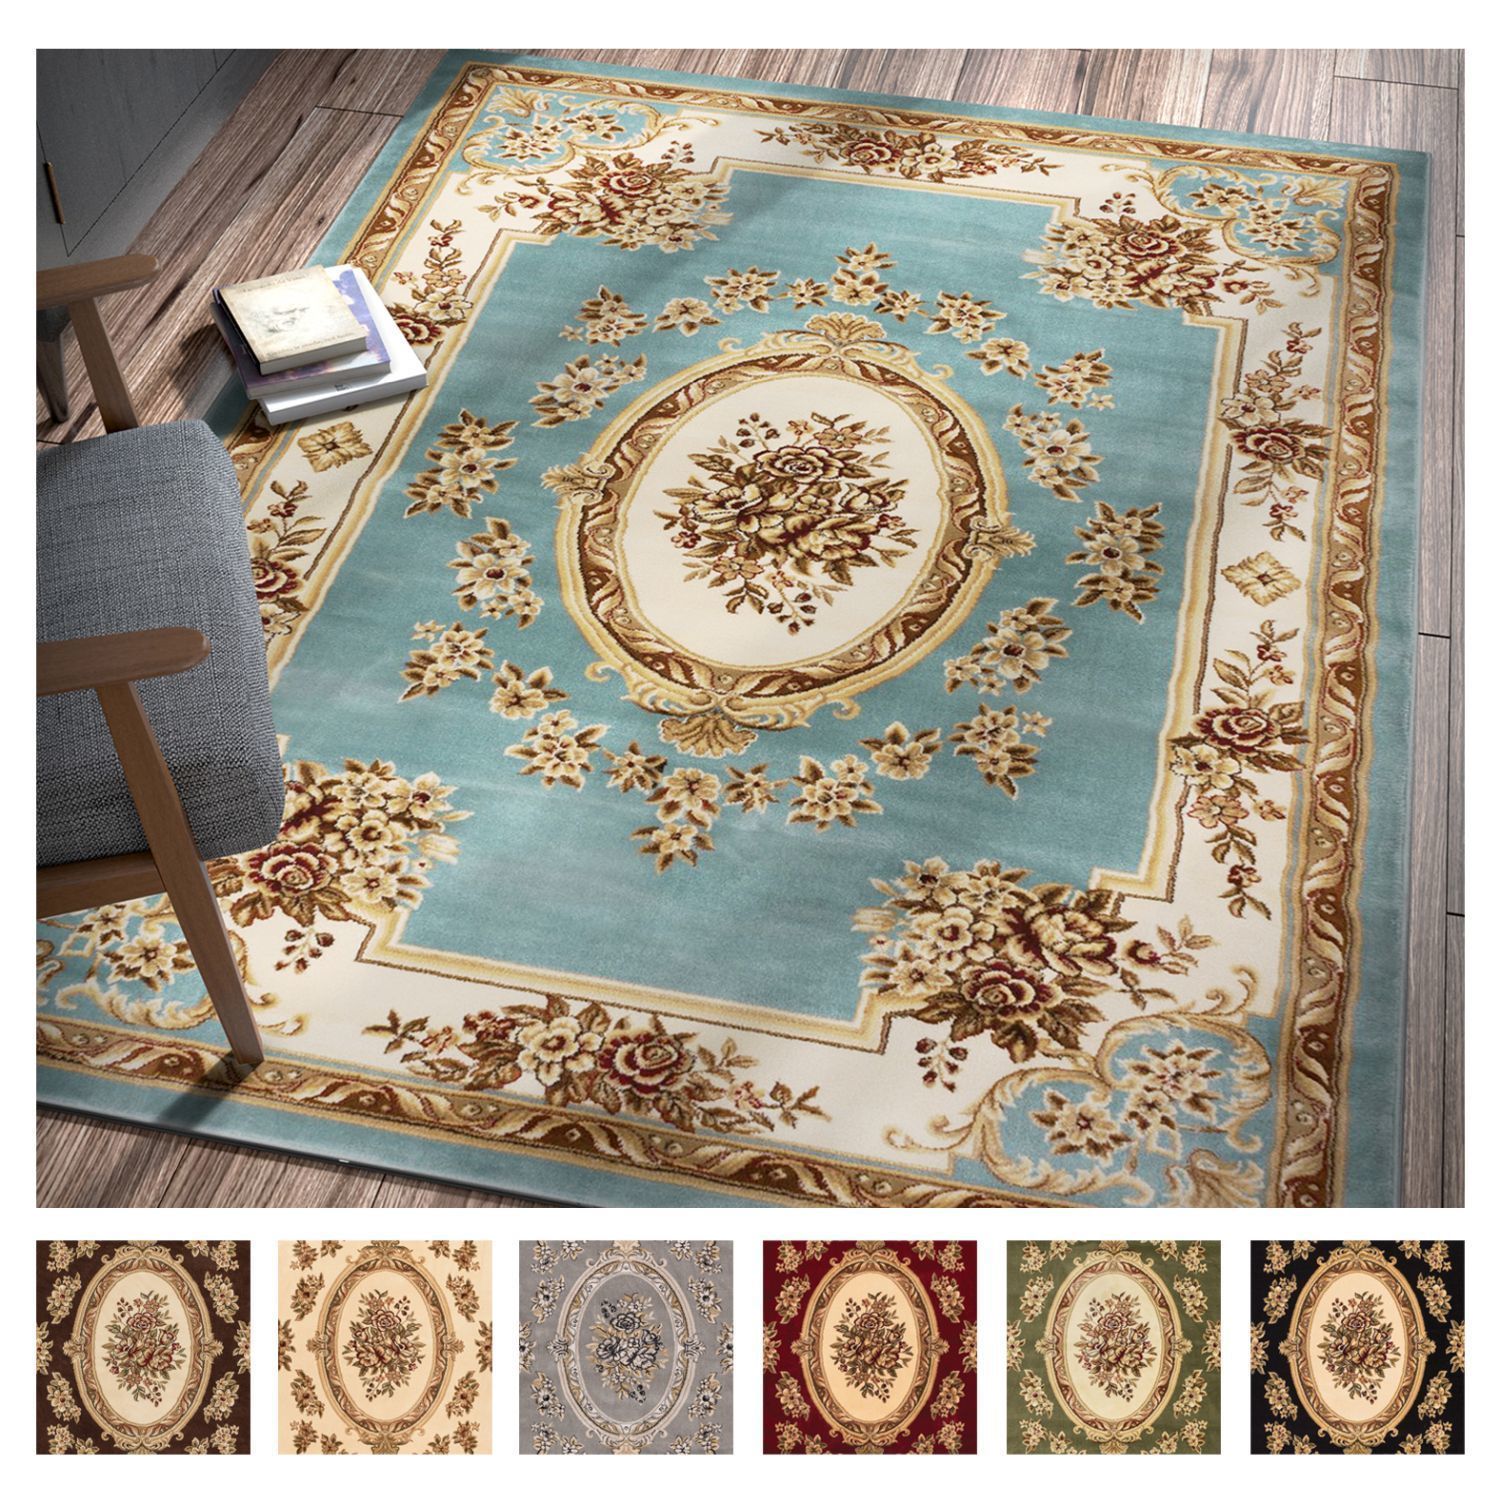 SMALL EXTRA LARGE CLASSIC TRADITIONAL AUBUSSON PATTERN DURABLE SOFT PILE RUGS 